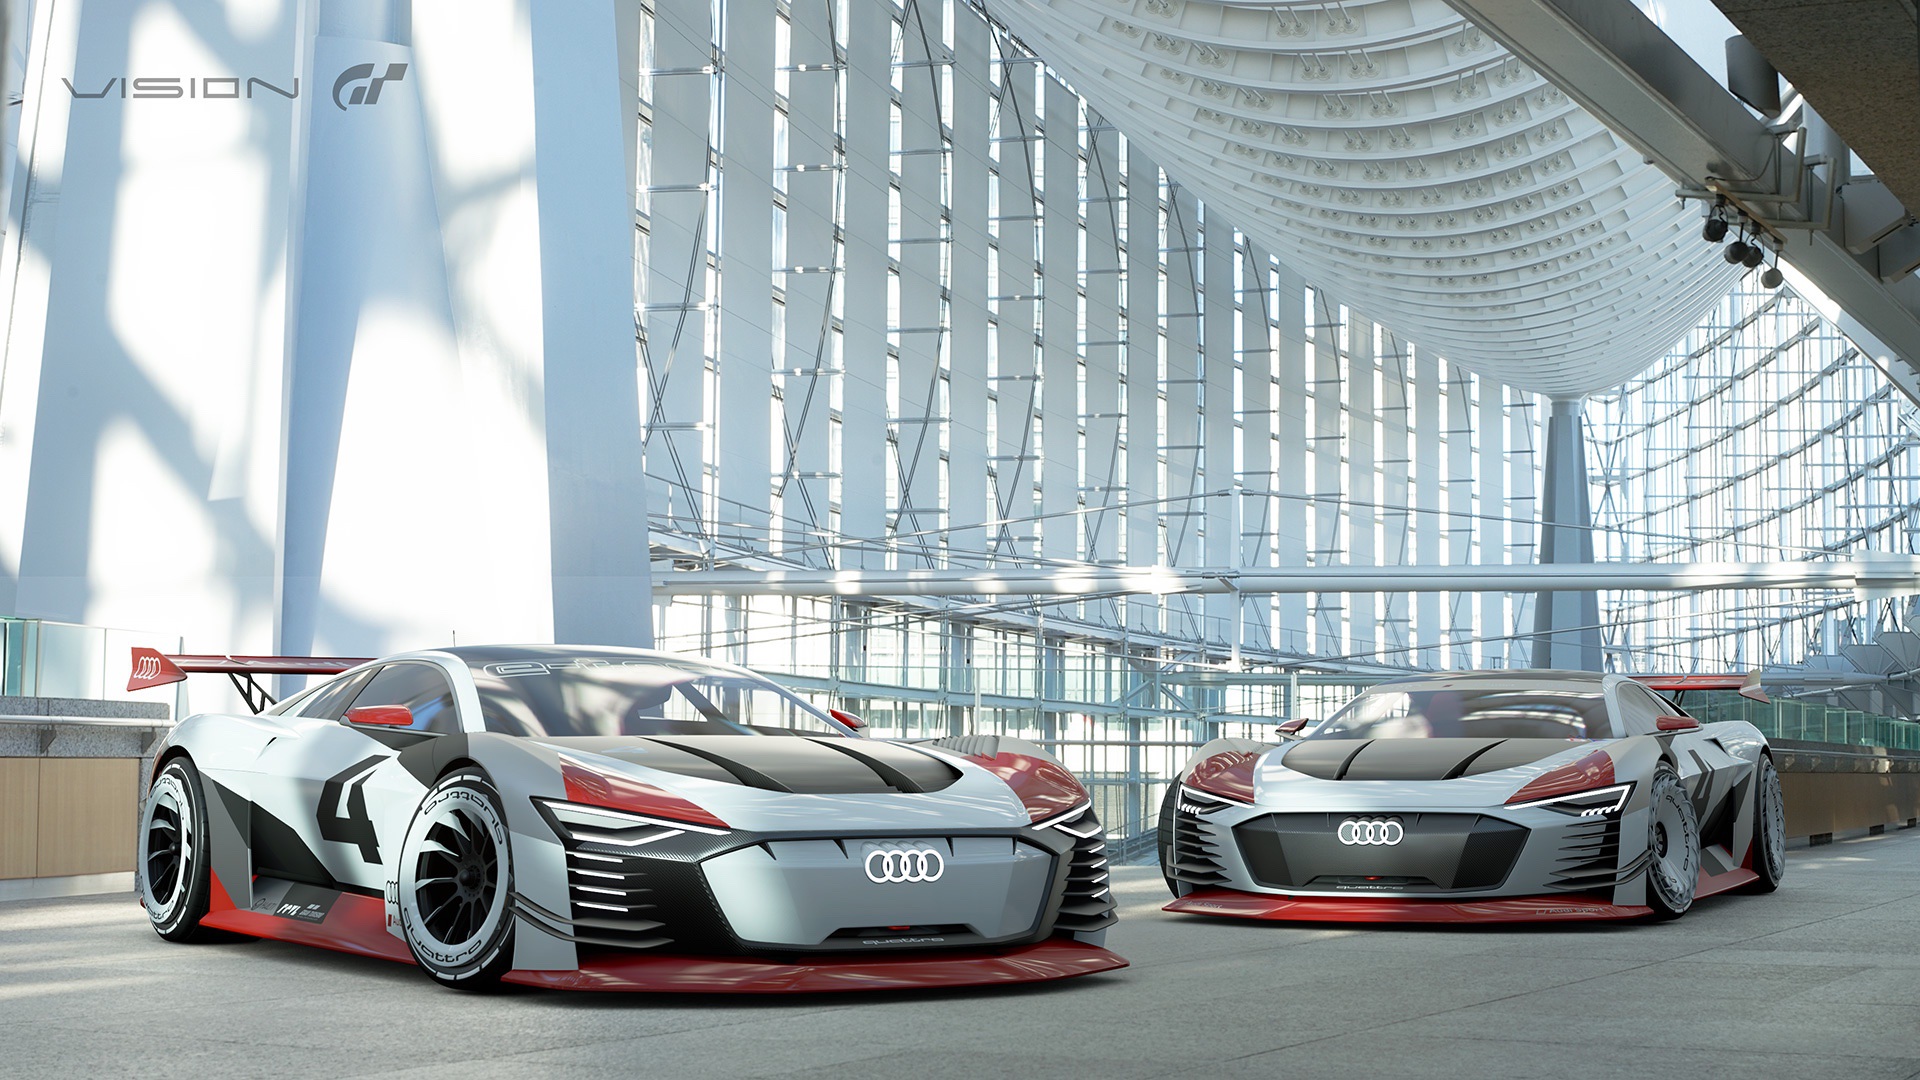 The Audi e-Tron Vision GT, which informed the shape and performance of the e-Tron GT replacement for the R8 V10 supercar